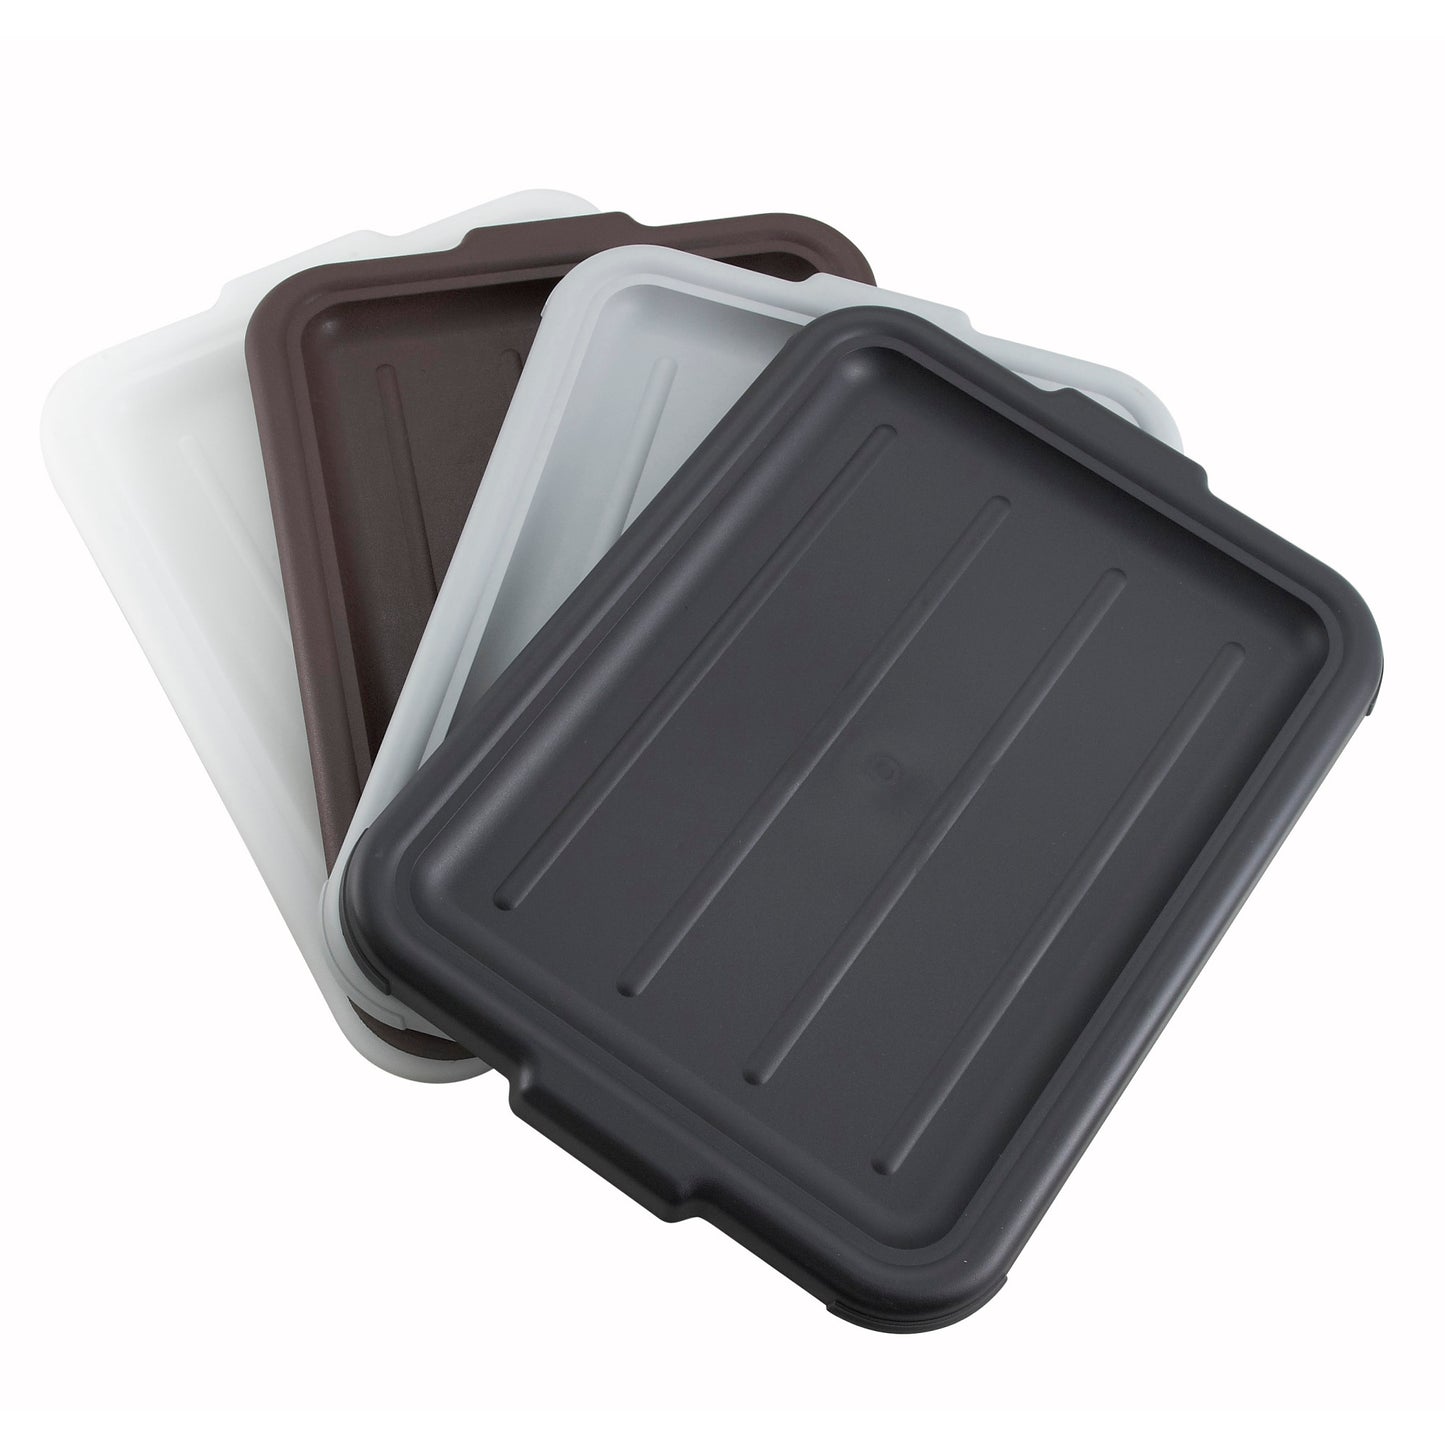 Cover for Standard Dish Boxes - Black